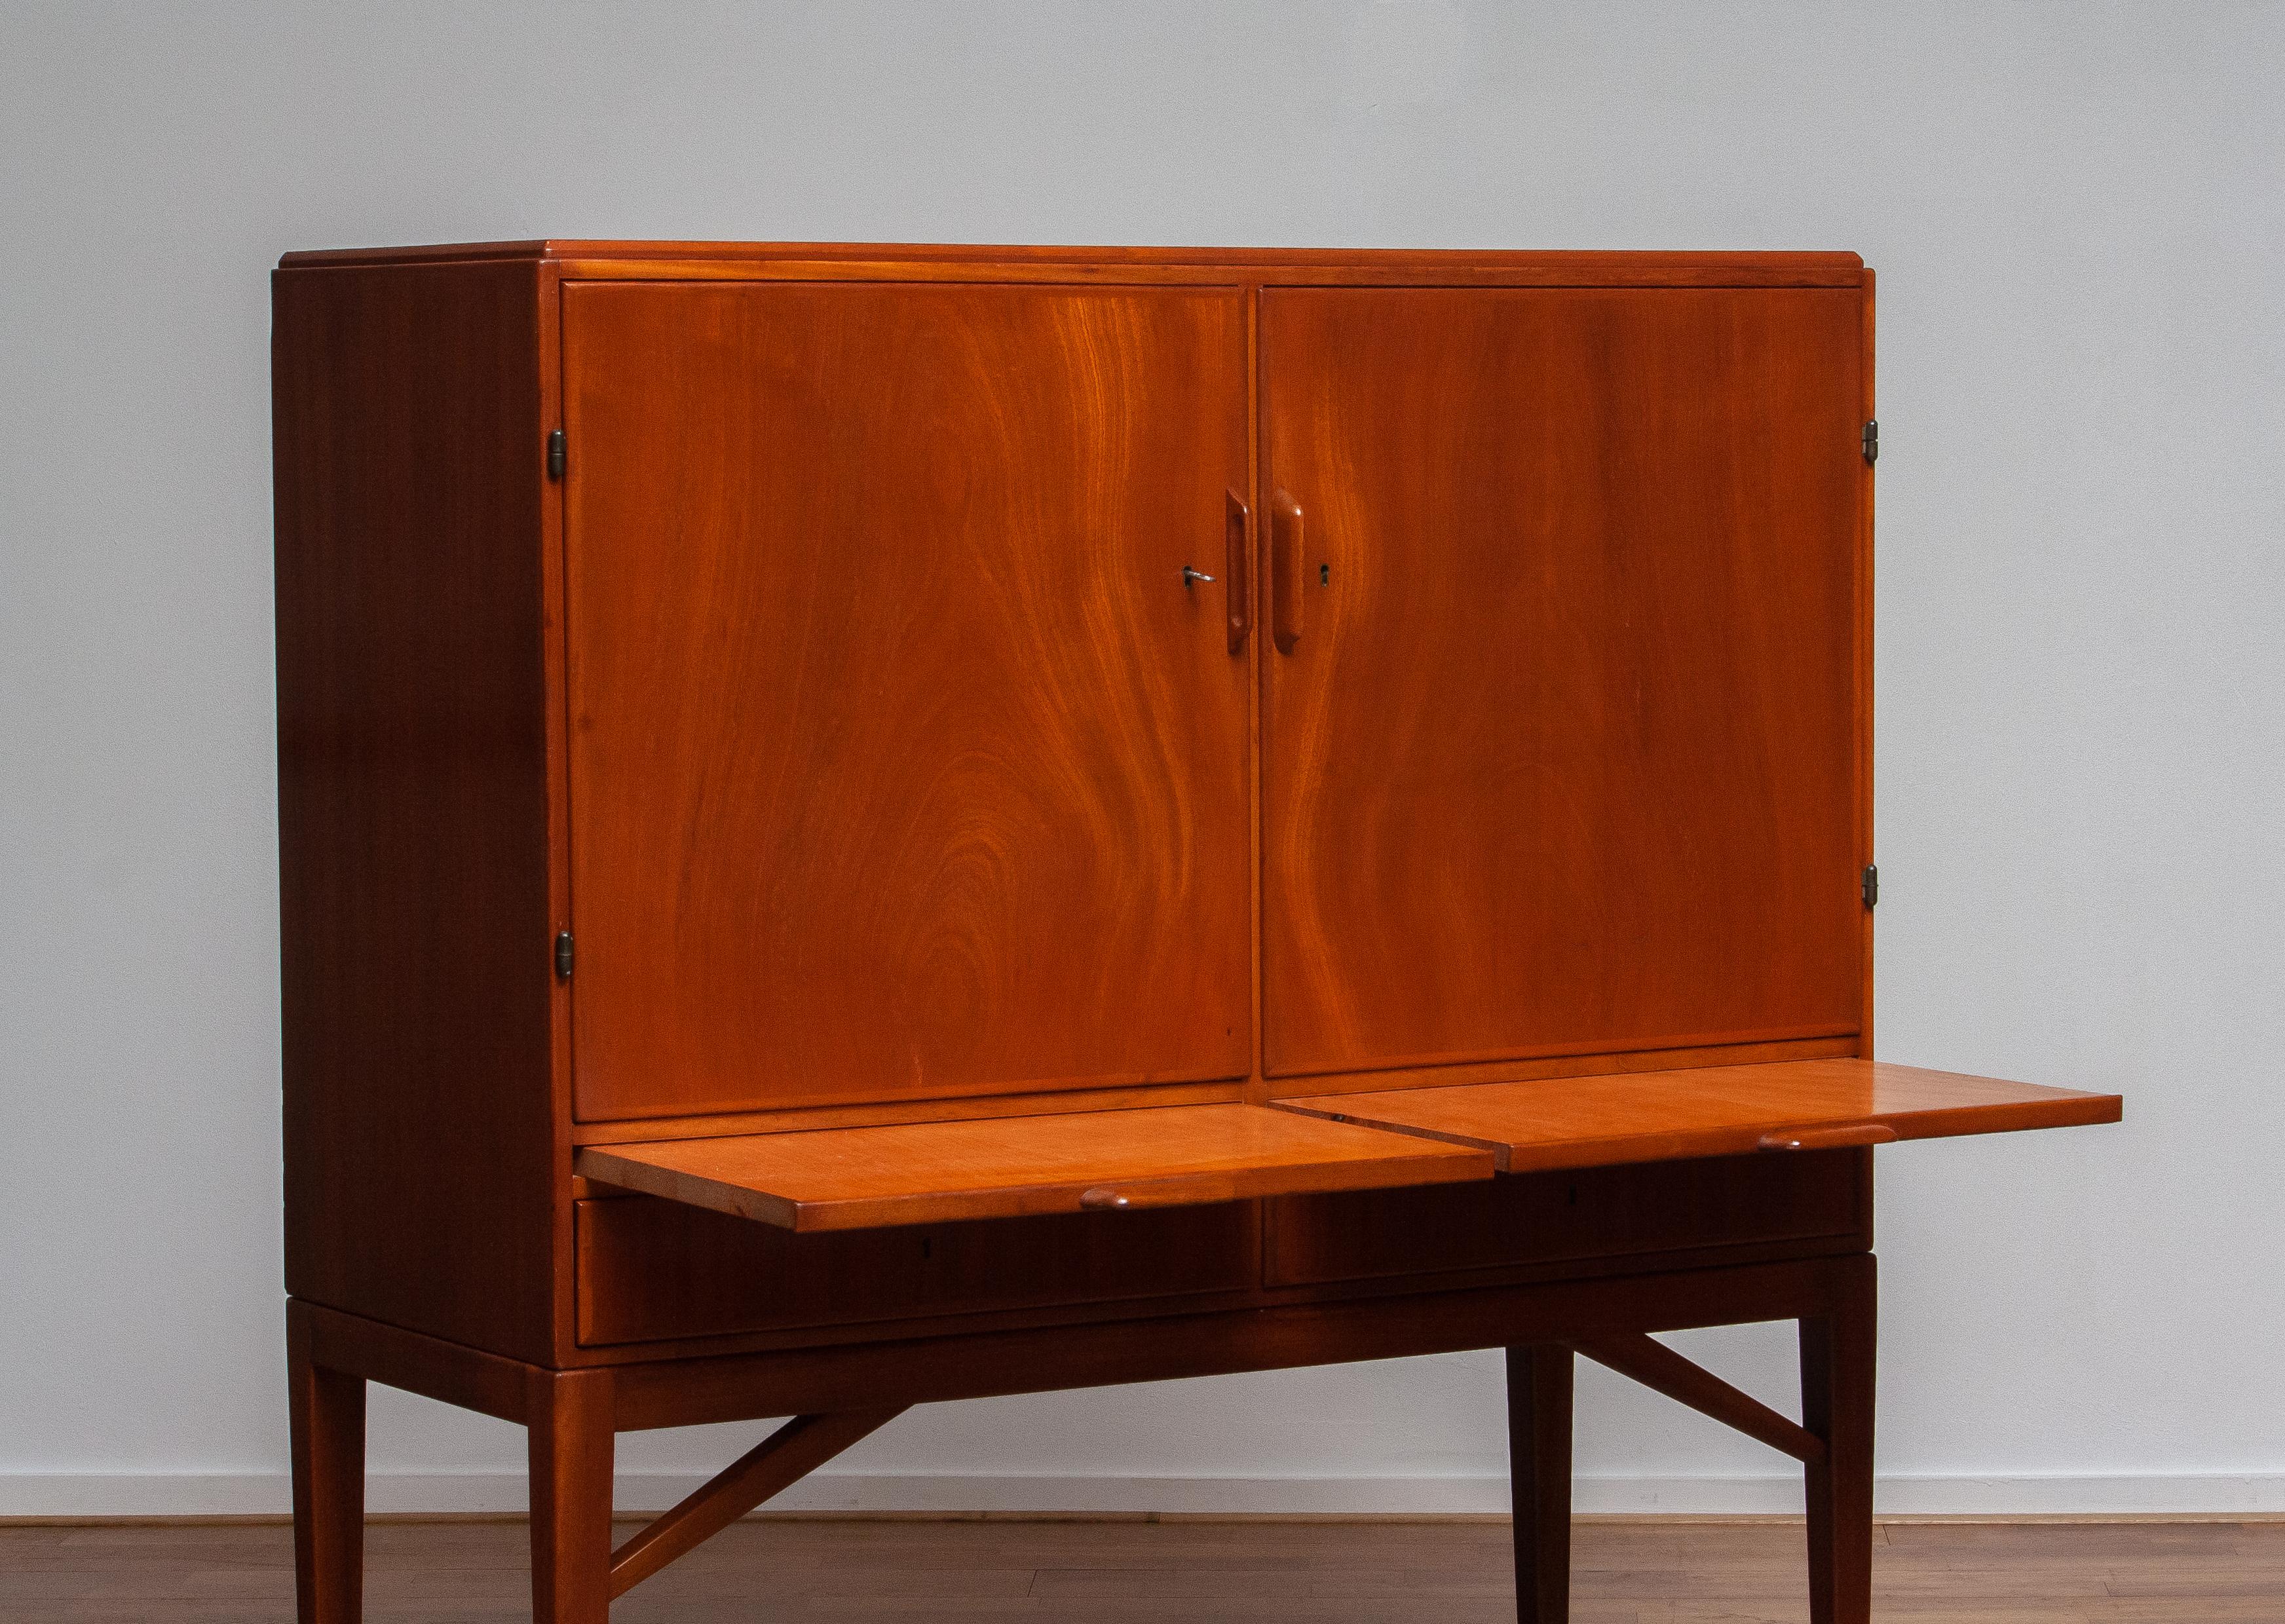 1950s, High Quality Mahogany Dry Bar / Cabinet Made by Marbo Sweden, SMI Labeled 4